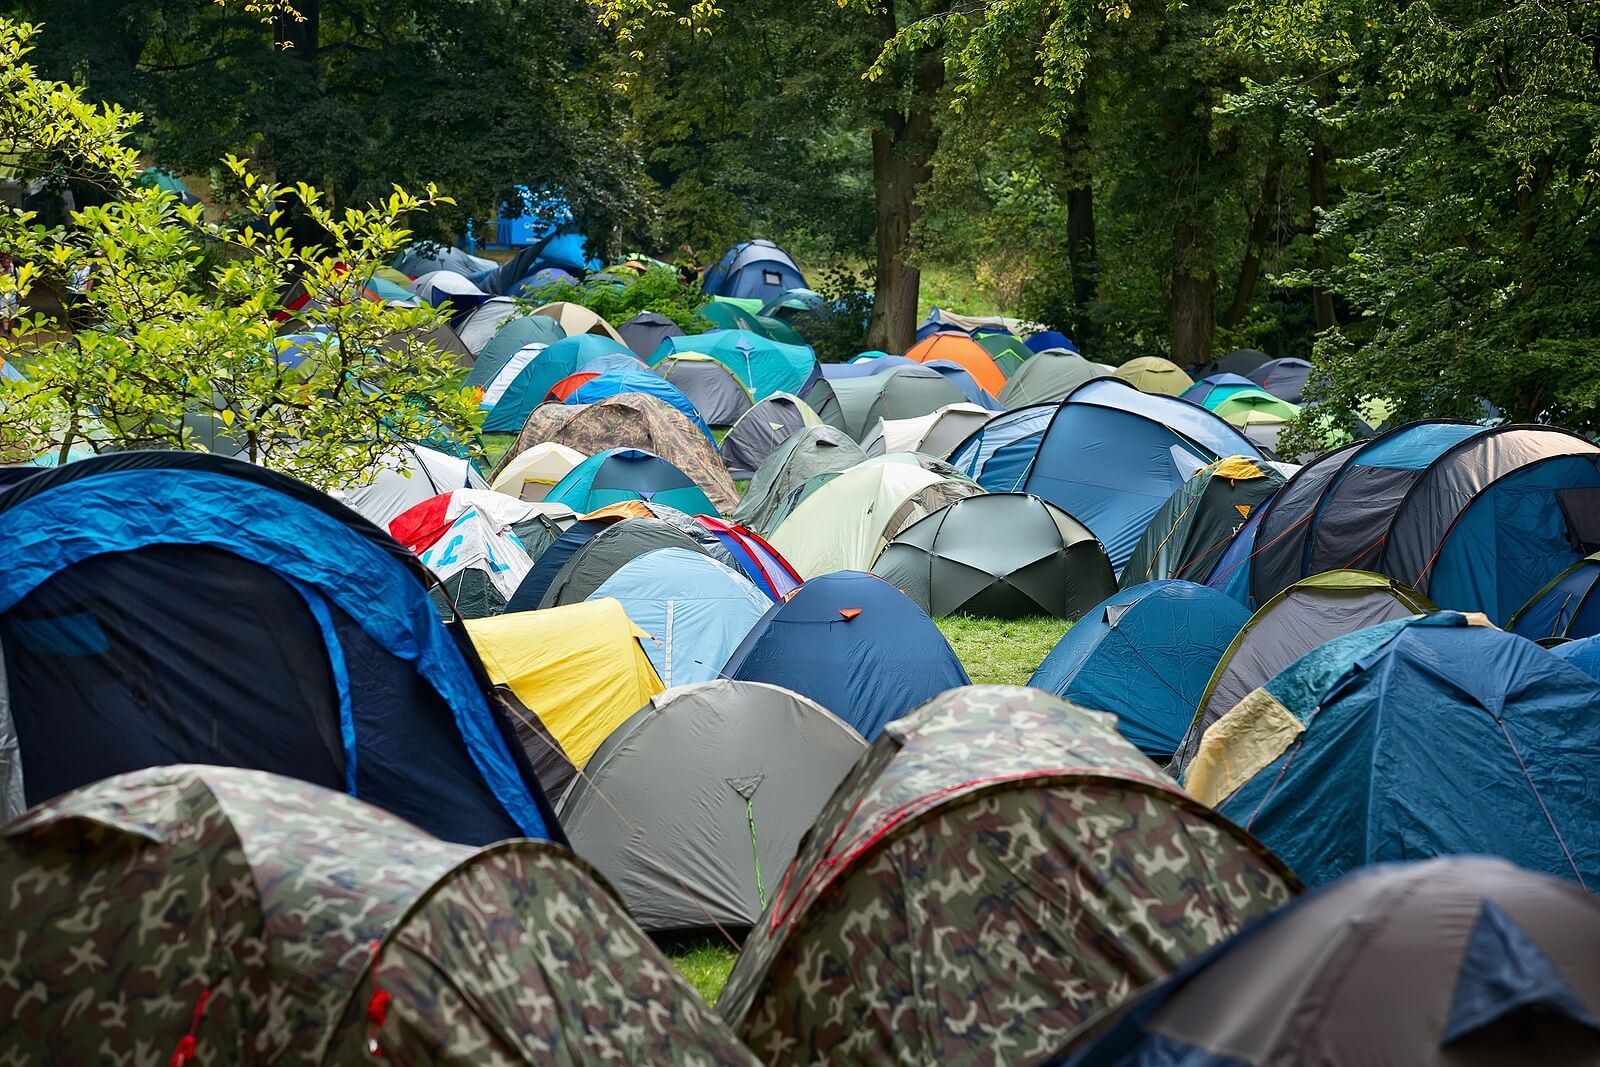 A festival campsite featuring many tents.